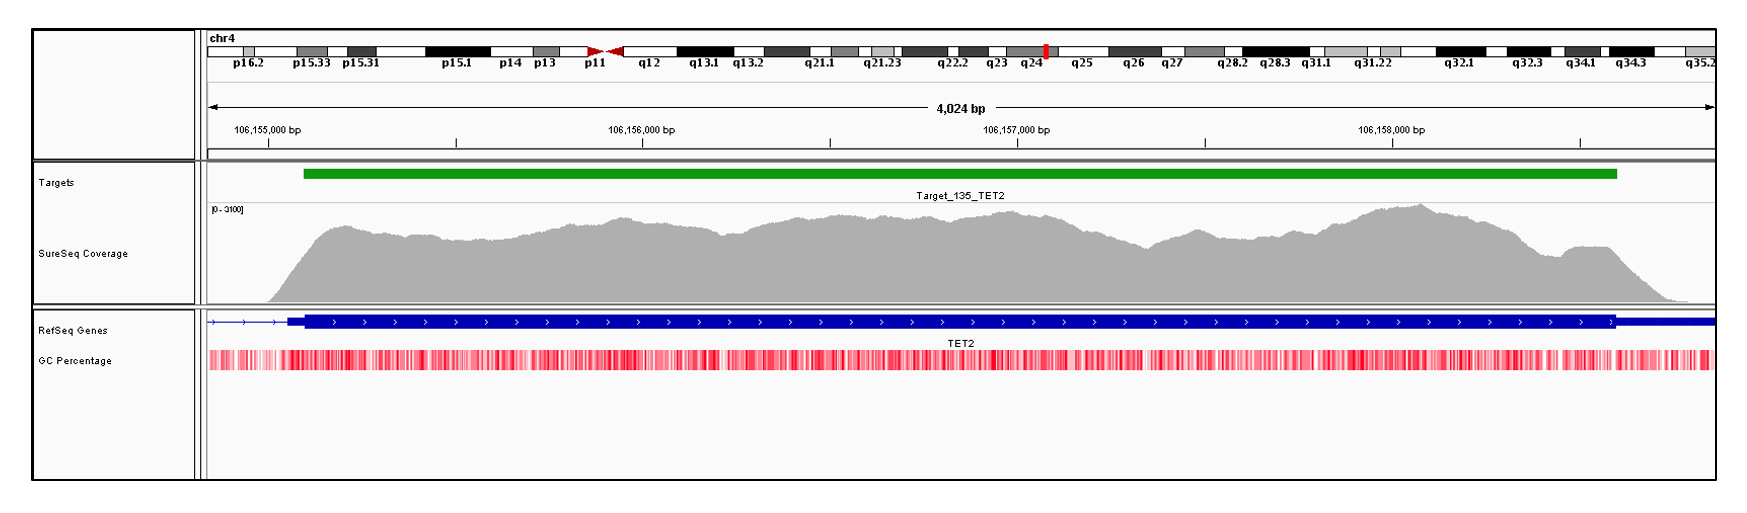 TET2 Exon 3 (hg19 chr4:106155054-106158508). Depth of coverage per base (grey). Targeted region (green). Gene coding region as defined by RefSeq (blue). GC percentage (red). Image